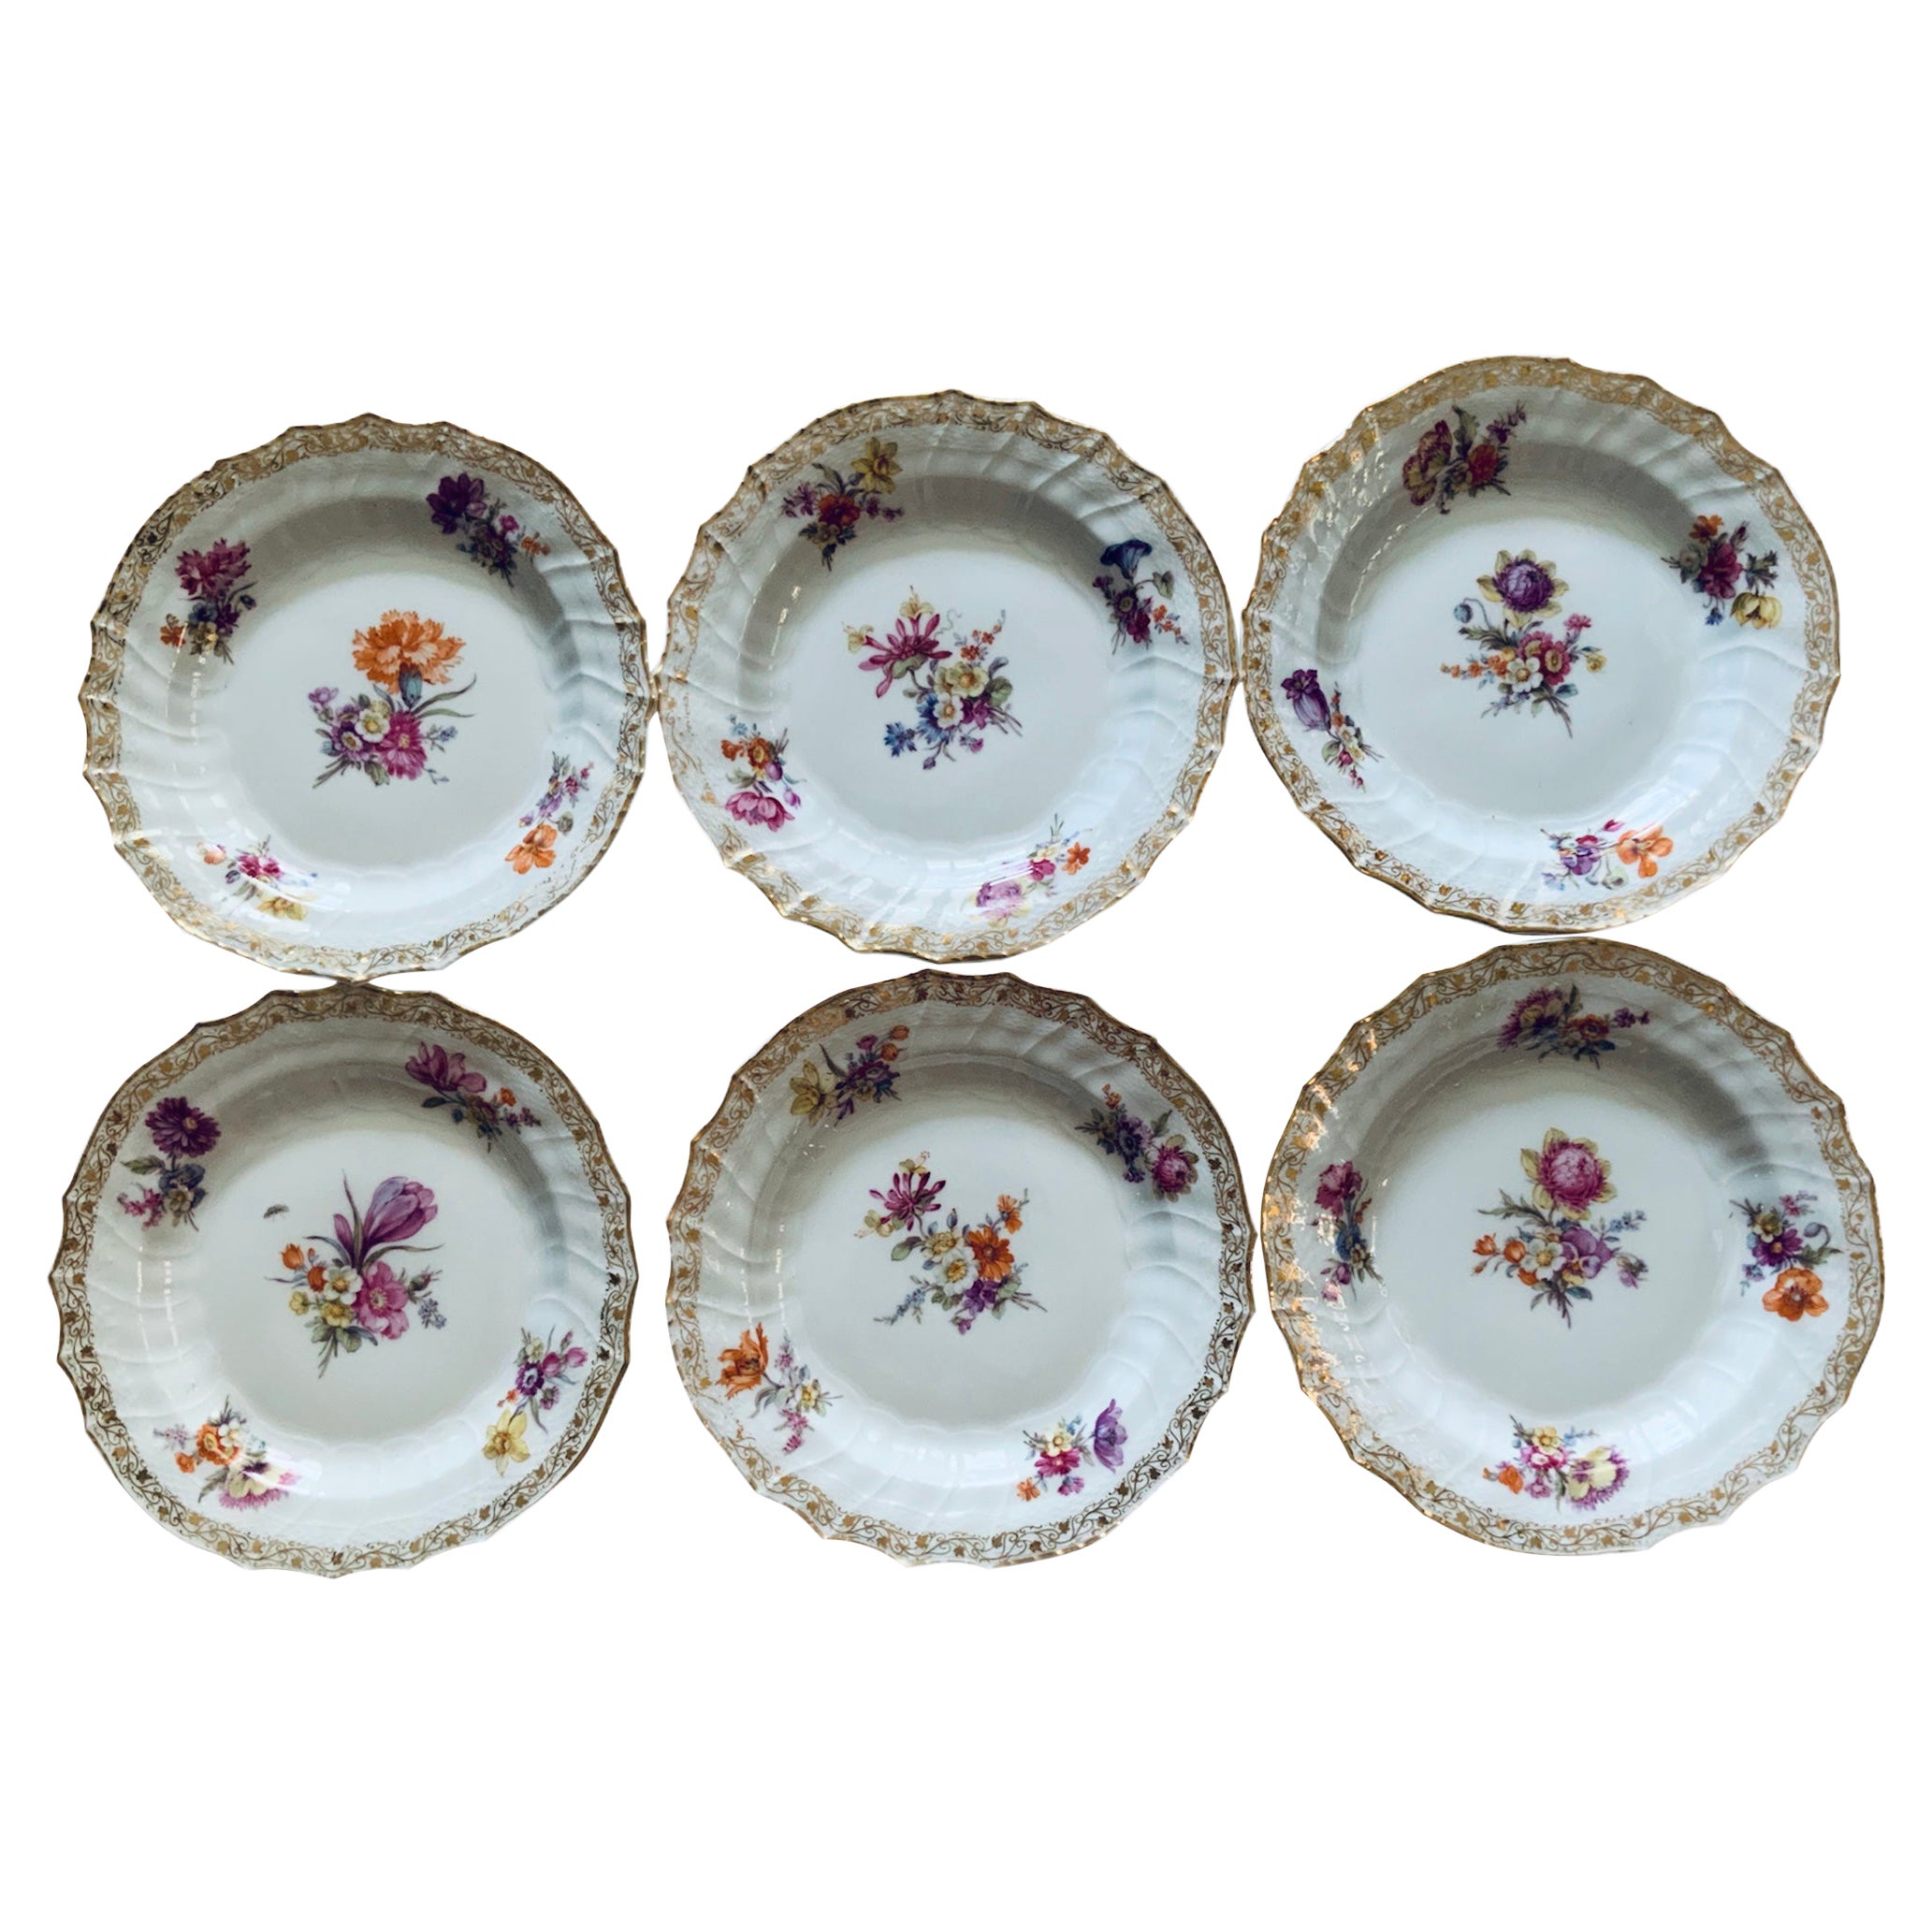 Set of Six KPM Bread and Butter Plates